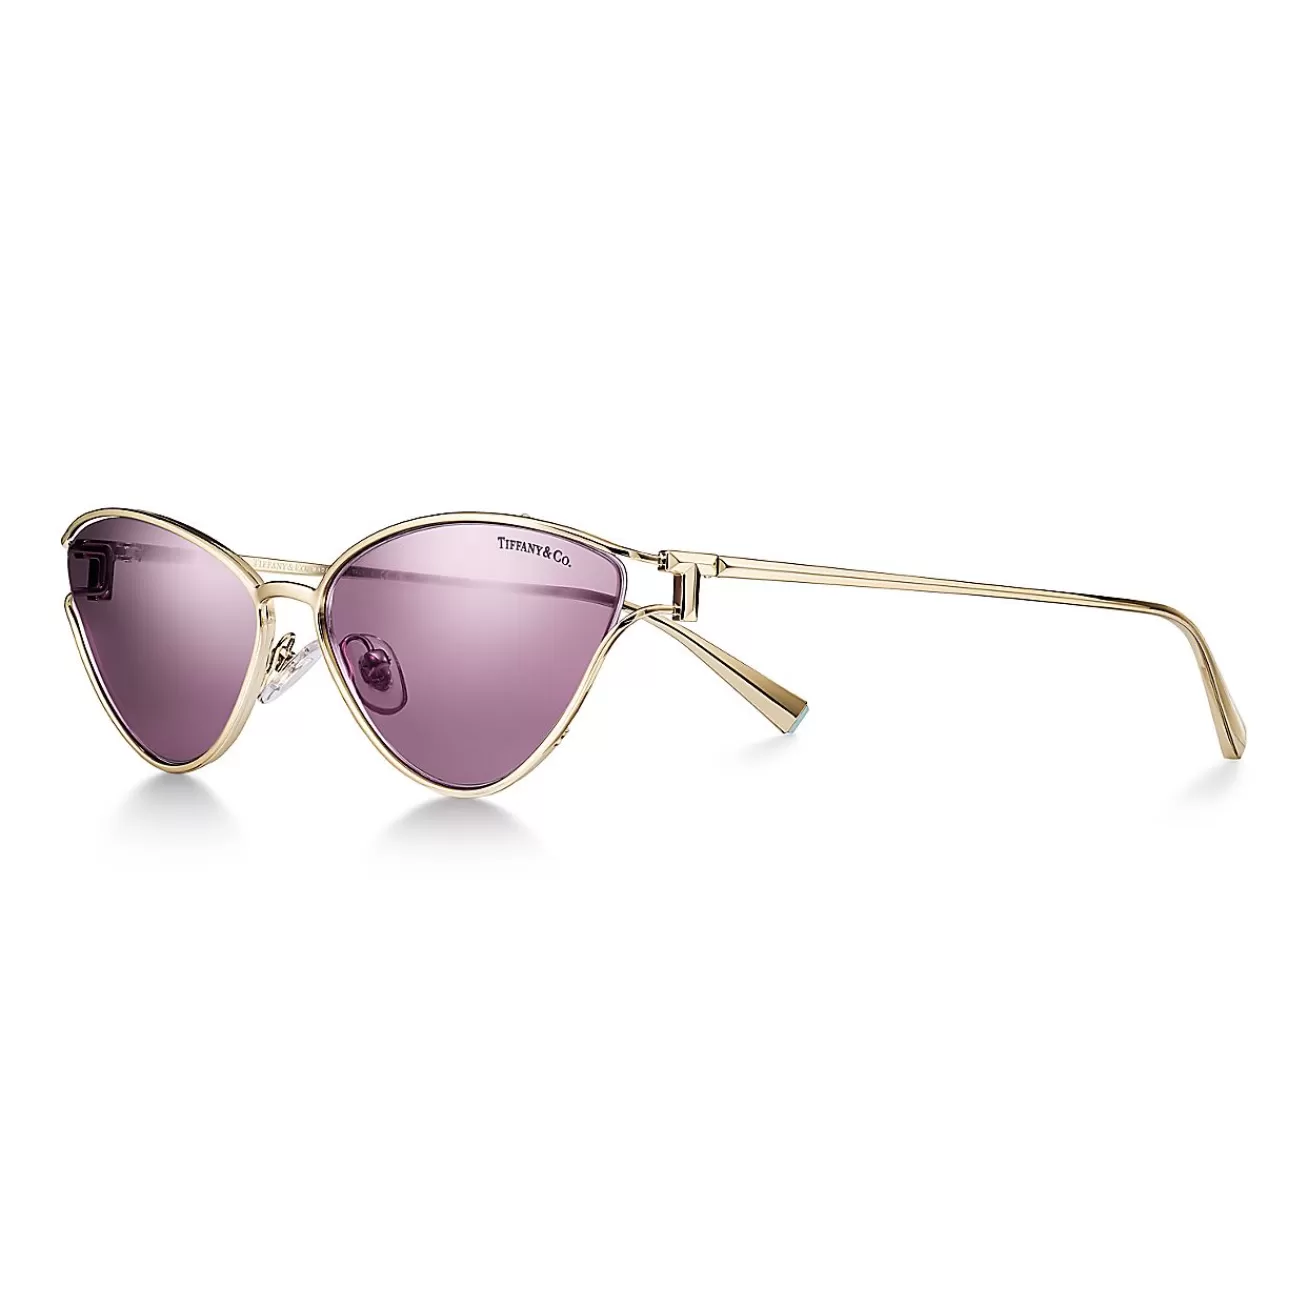 Tiffany & Co. Tiffany T Sunglasses in Pale Gold-colored Metal with Violet Mirrored Lenses | ^Women Tiffany T | Sunglasses